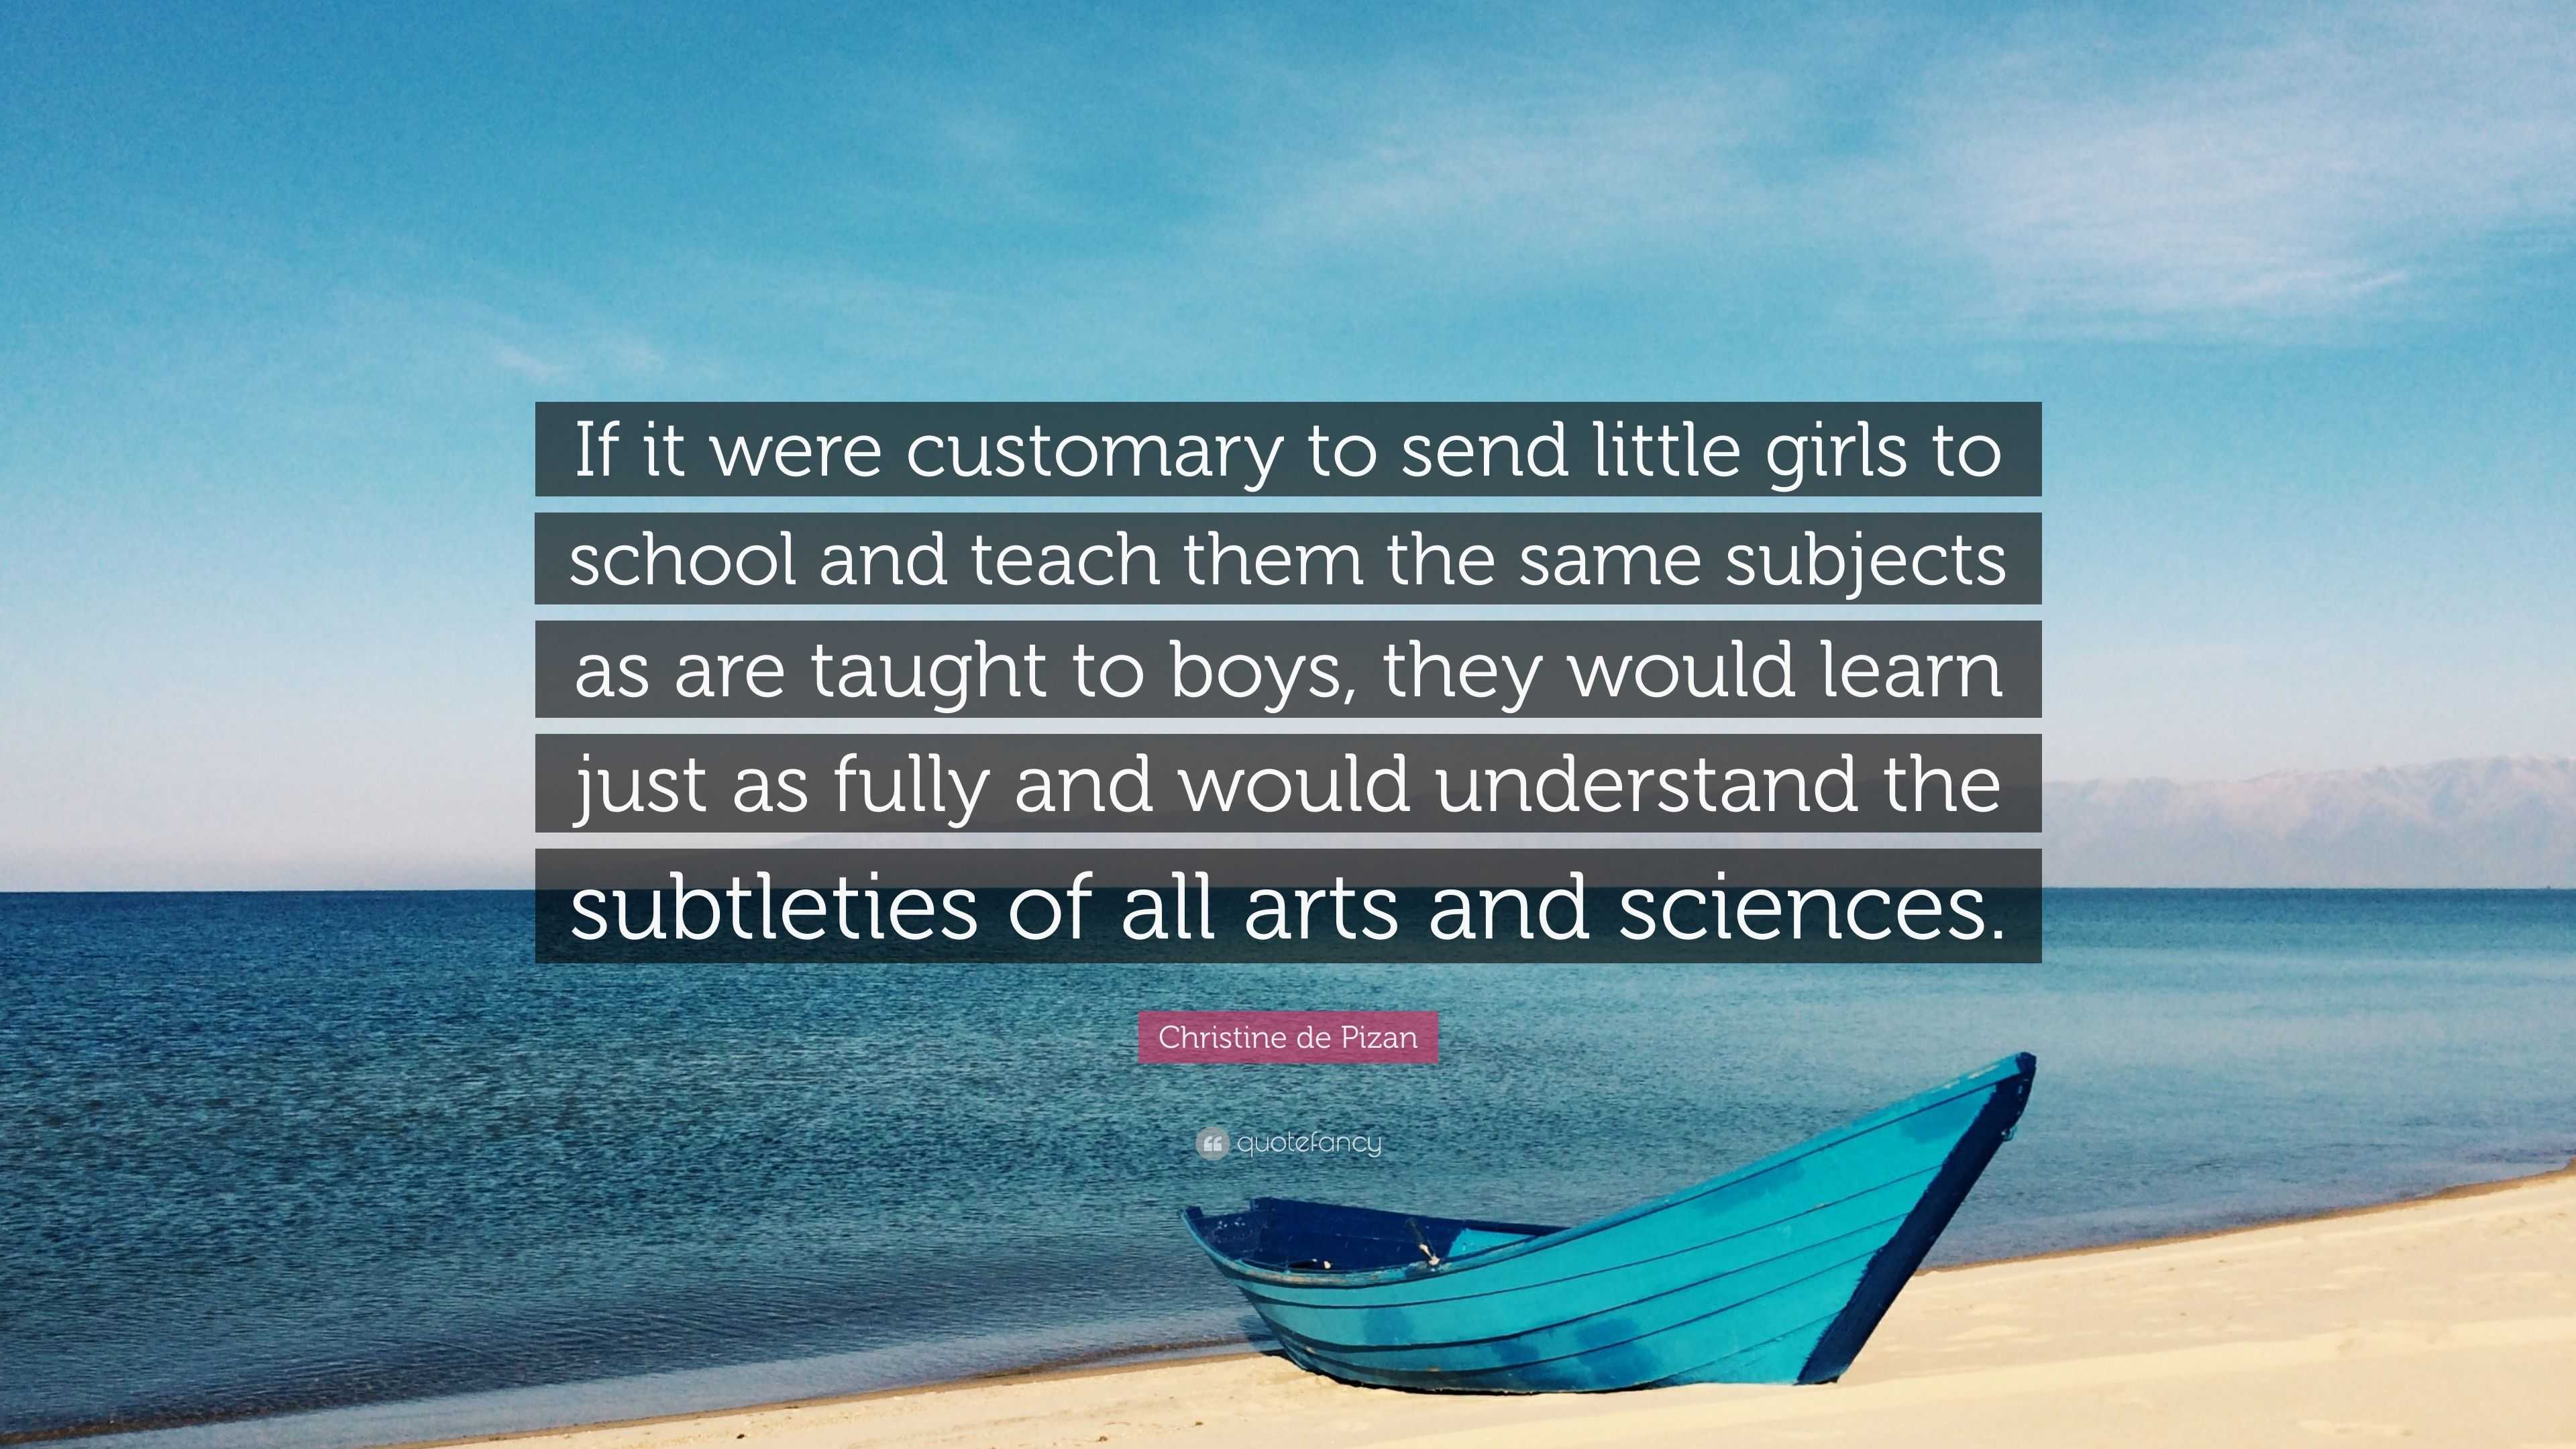 Christine de Pizan Quote: “If it were customary to send little girls to ...